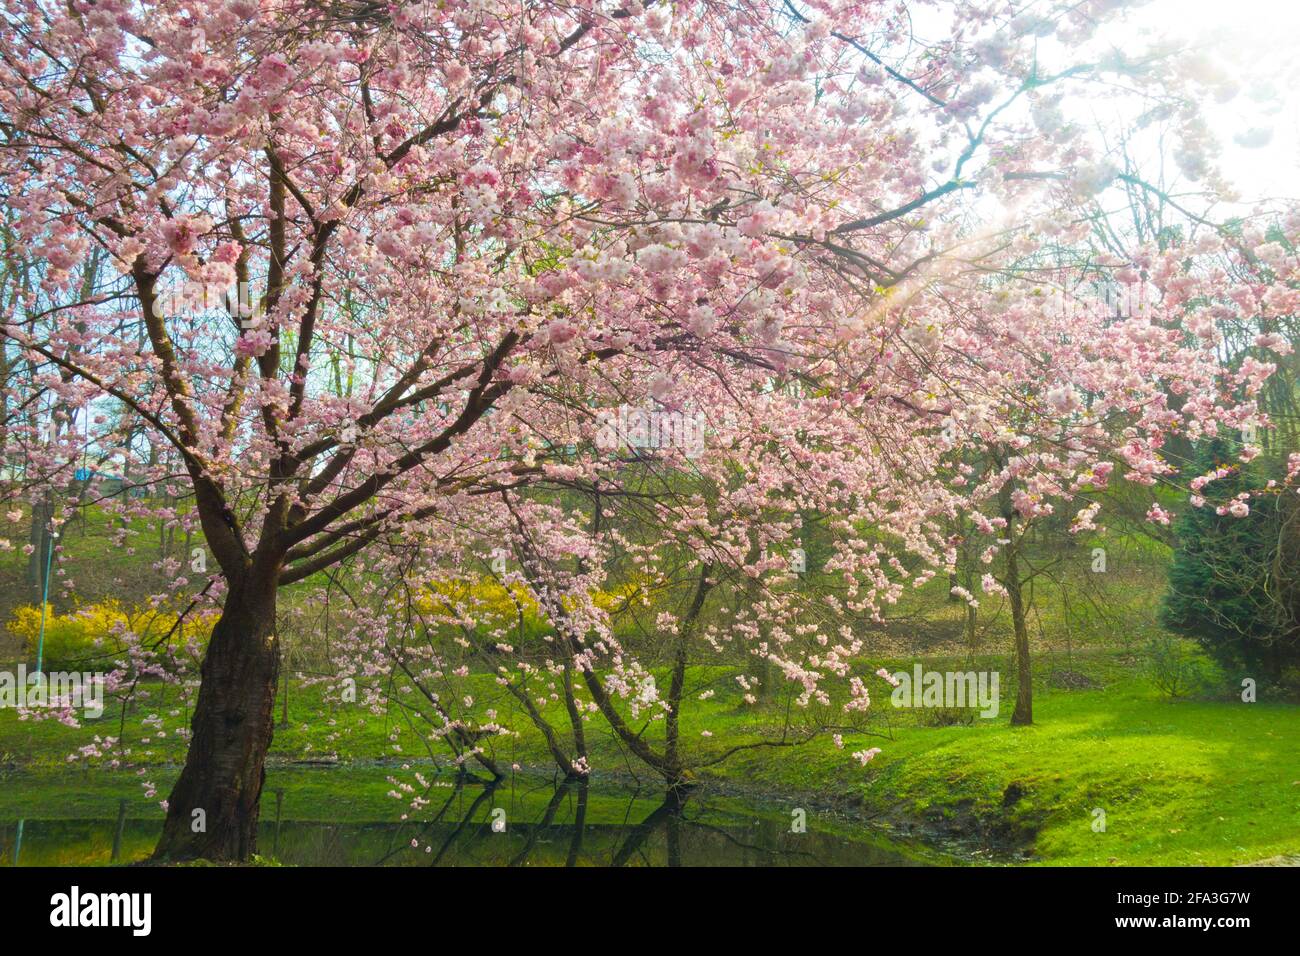 tree of cherry with flowers blooming Stock Photo